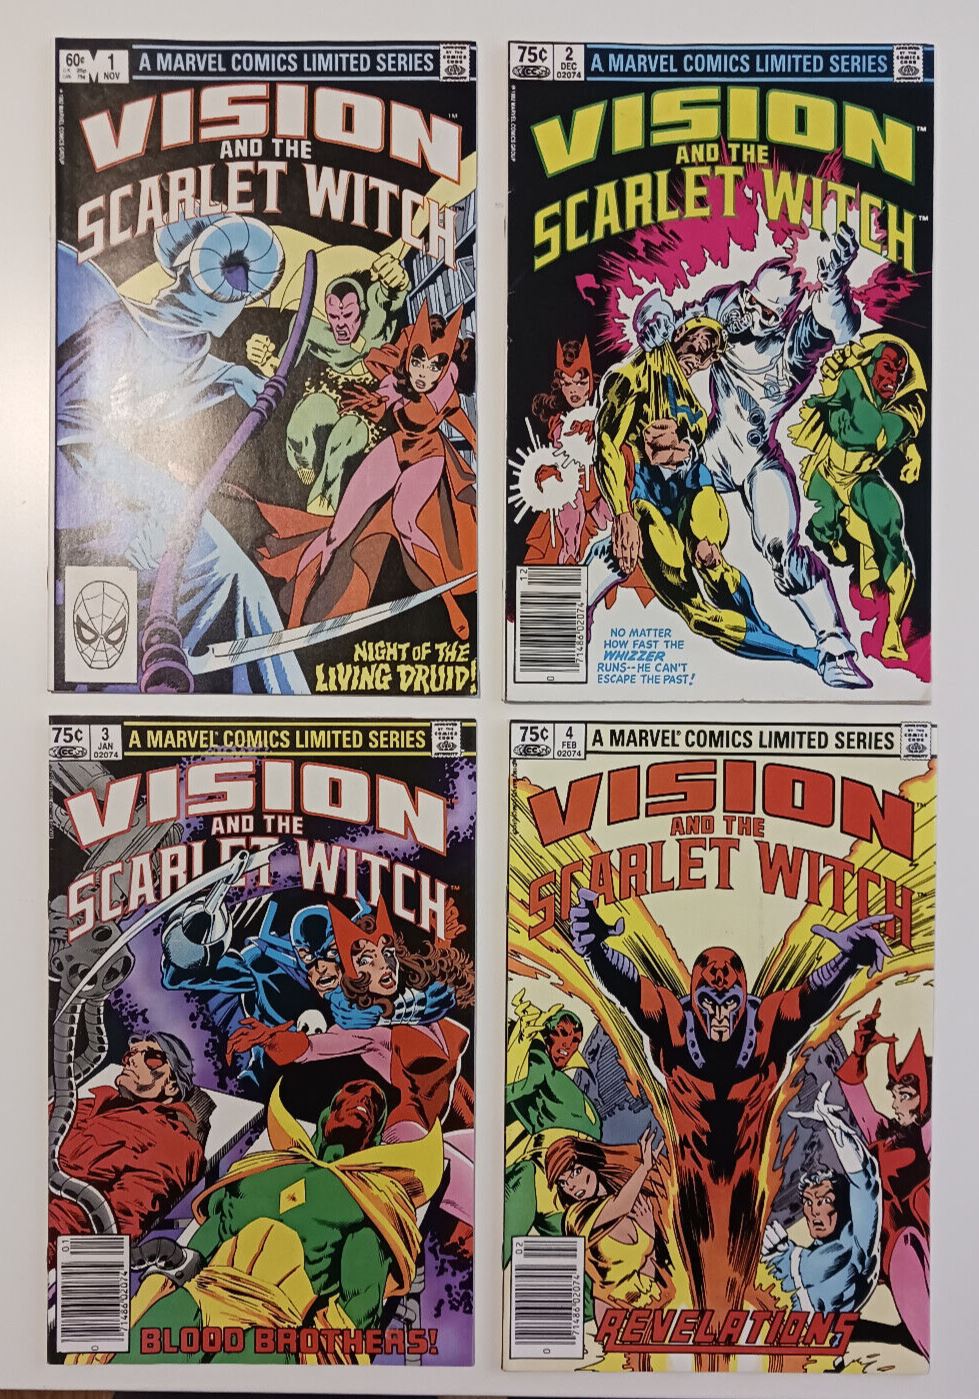 1982-83 Marvel Comics Vision and the Scarlet Witch #1,2,3 and 4 Lot Newsstand